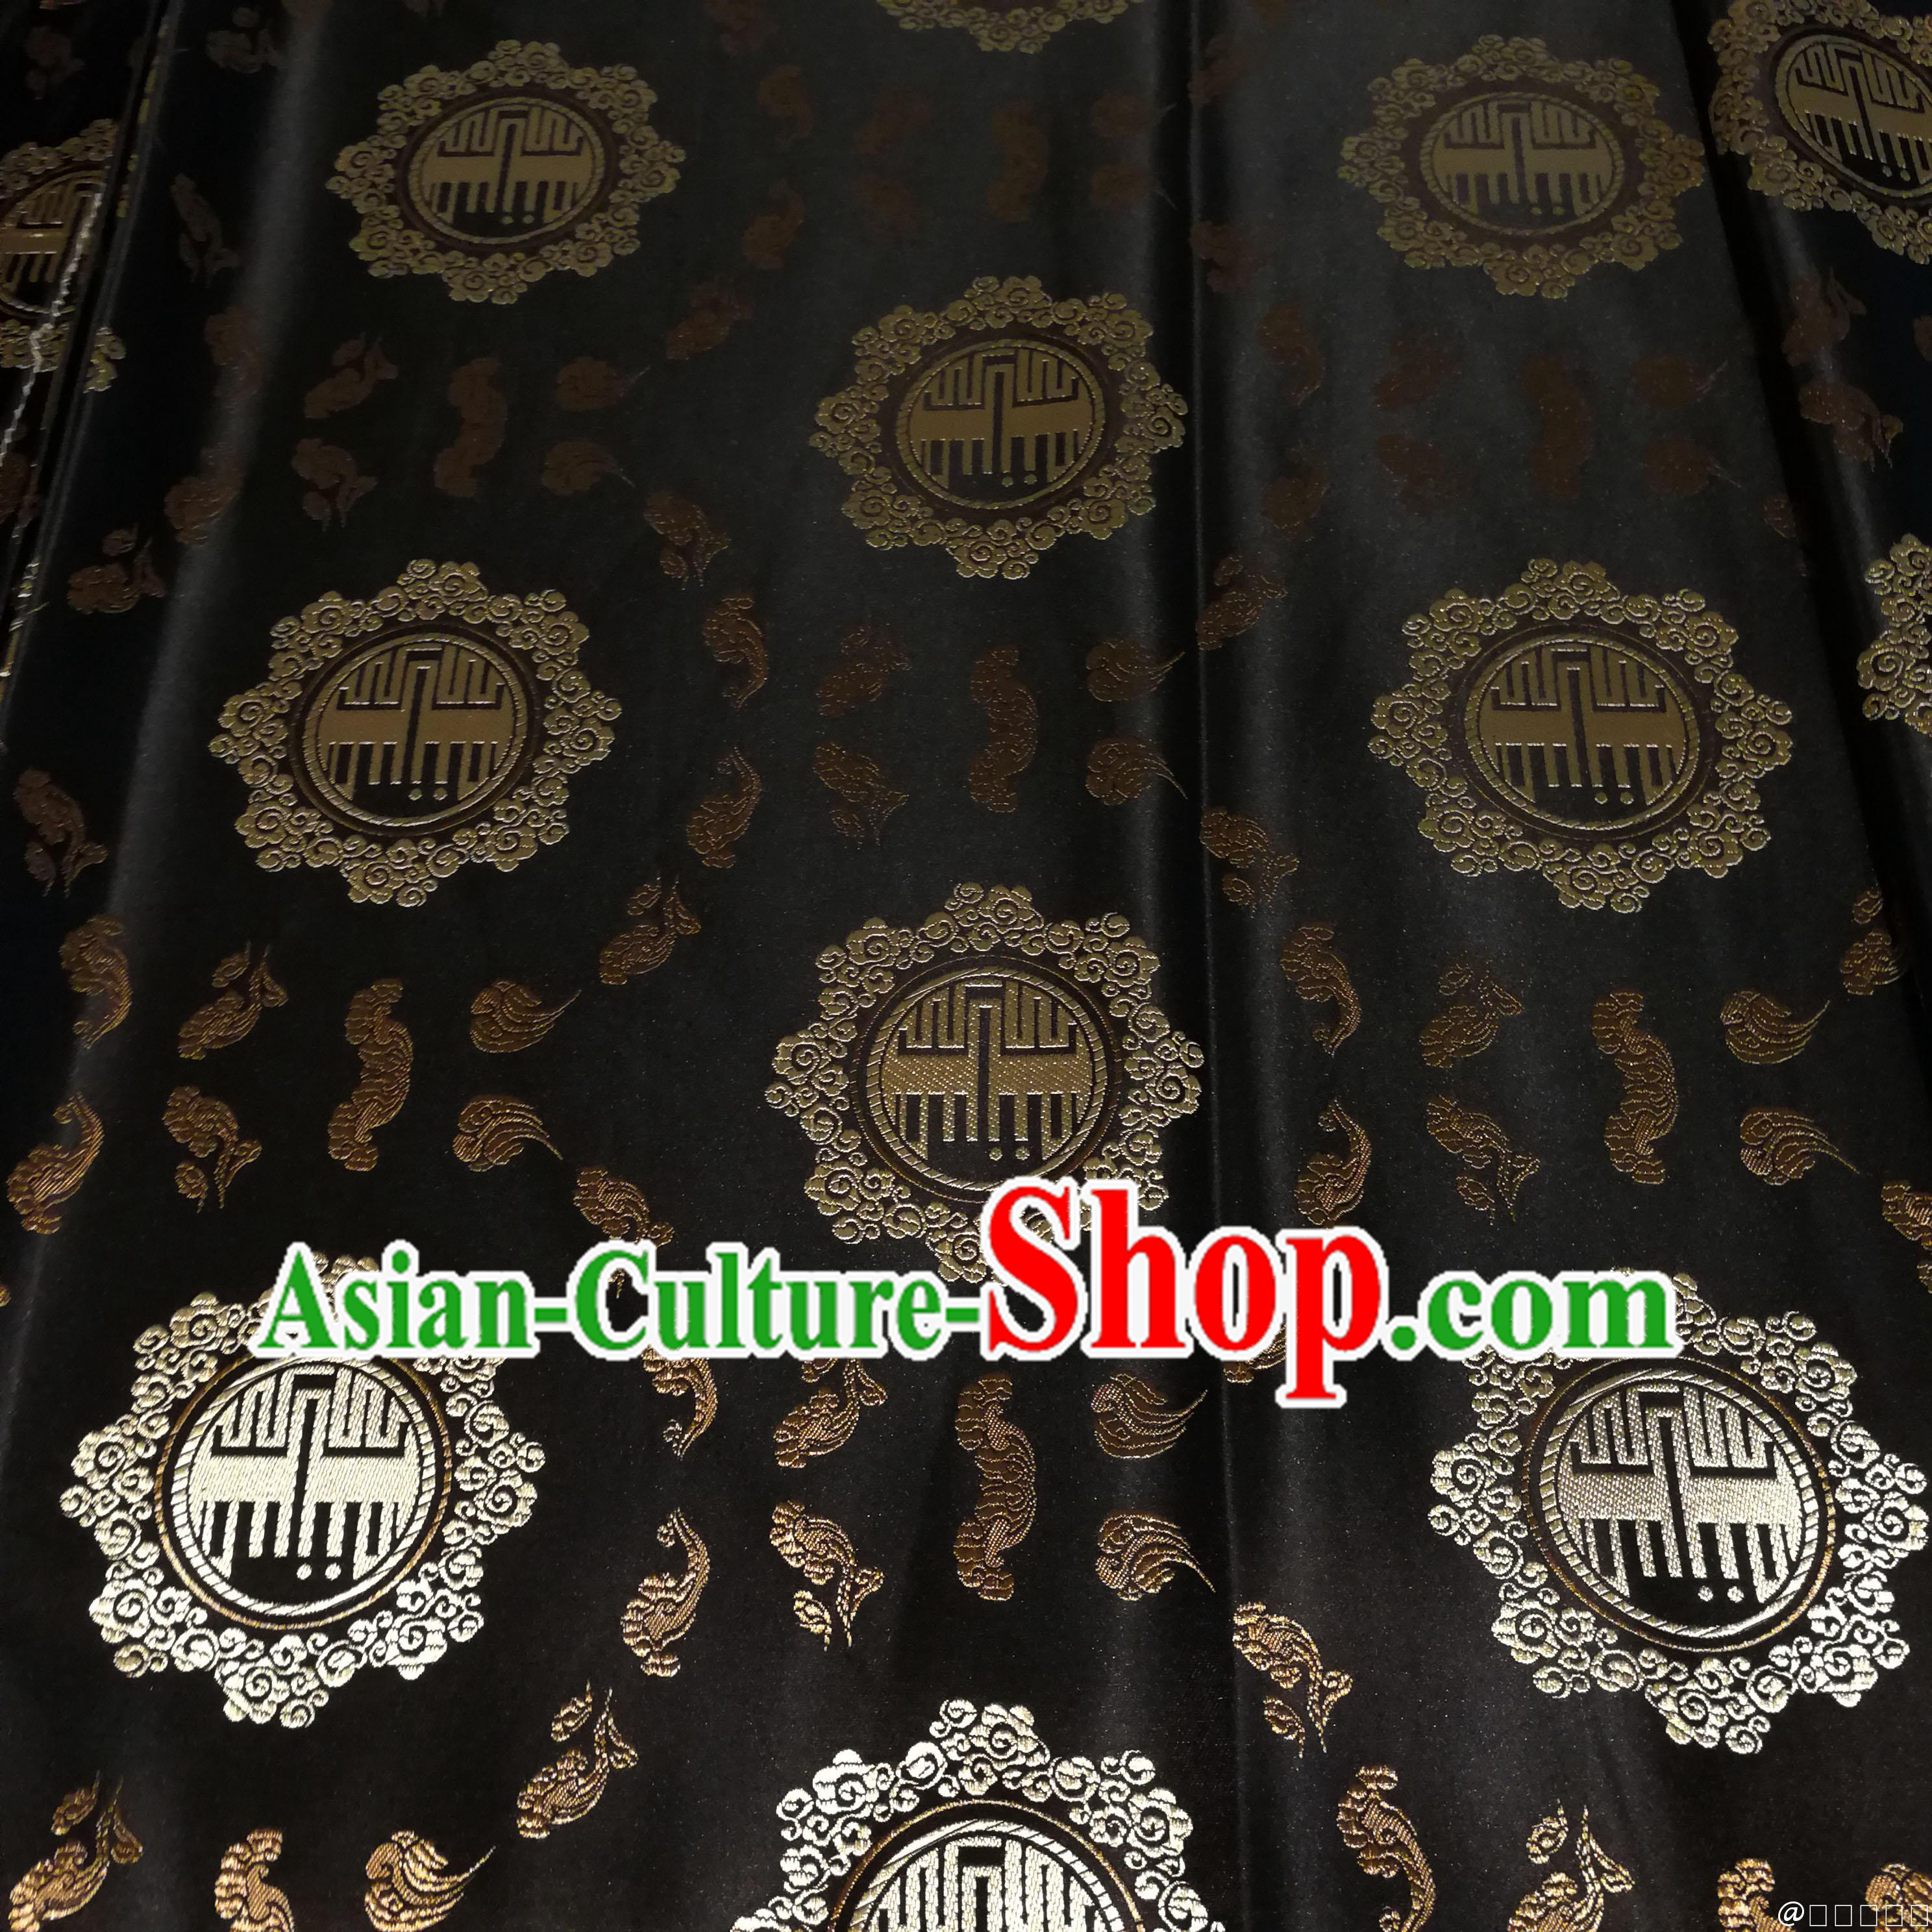 Black Color Chinese Royal Palace Style Traditional Pattern Auspicious Cloud Design Brocade Fabric Silk Fabric Chinese Fabric Asian Material